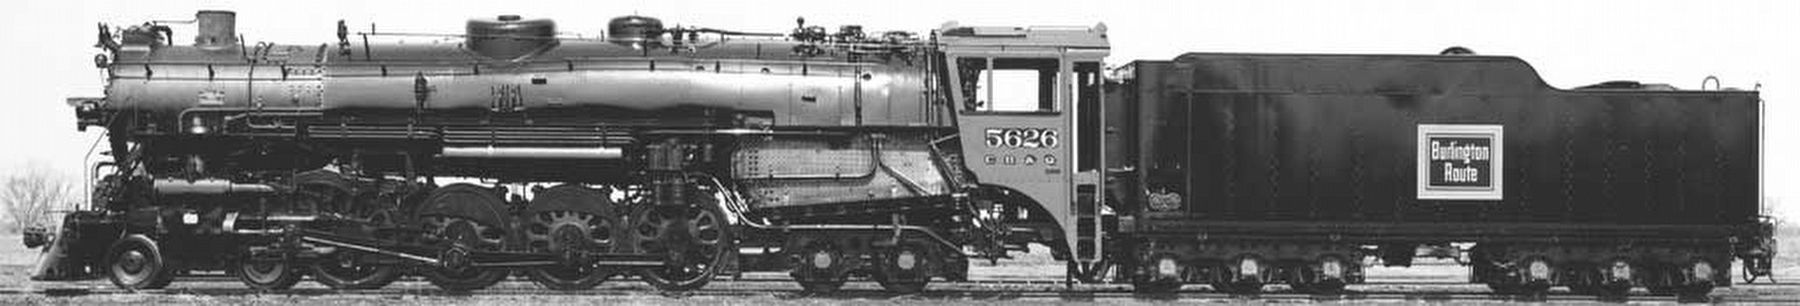 Chicago, Burlington & Quincy 4-8-4 "Northern" Locomotive image. Click for full size.